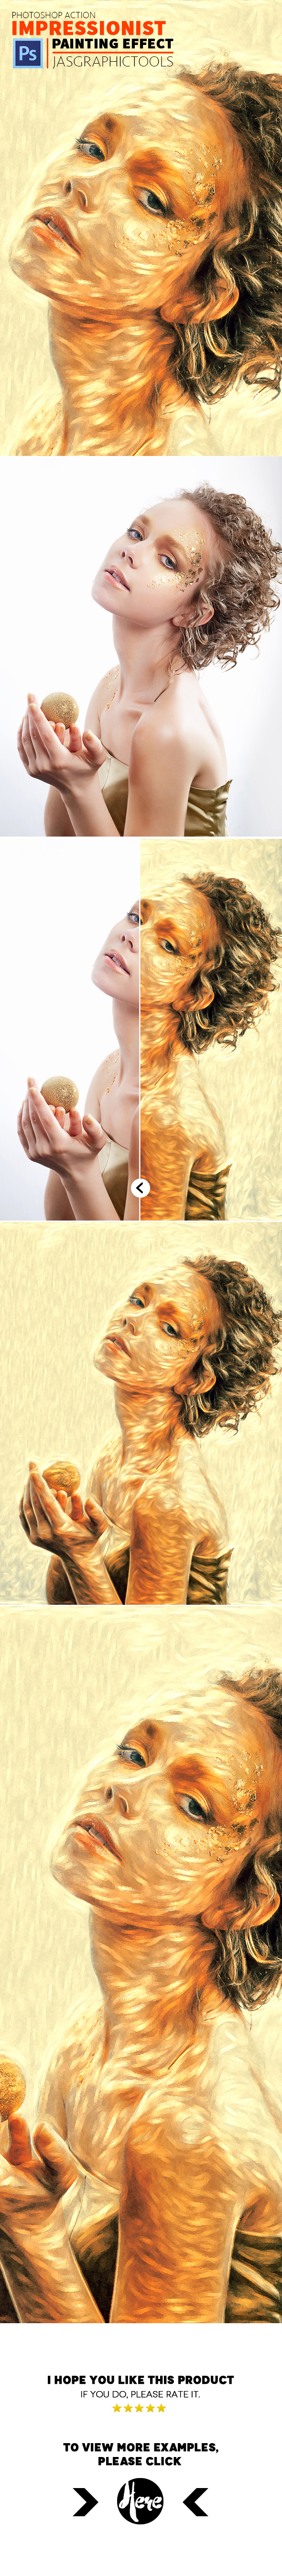 Impressionist Painting Effect | Photoshop Action